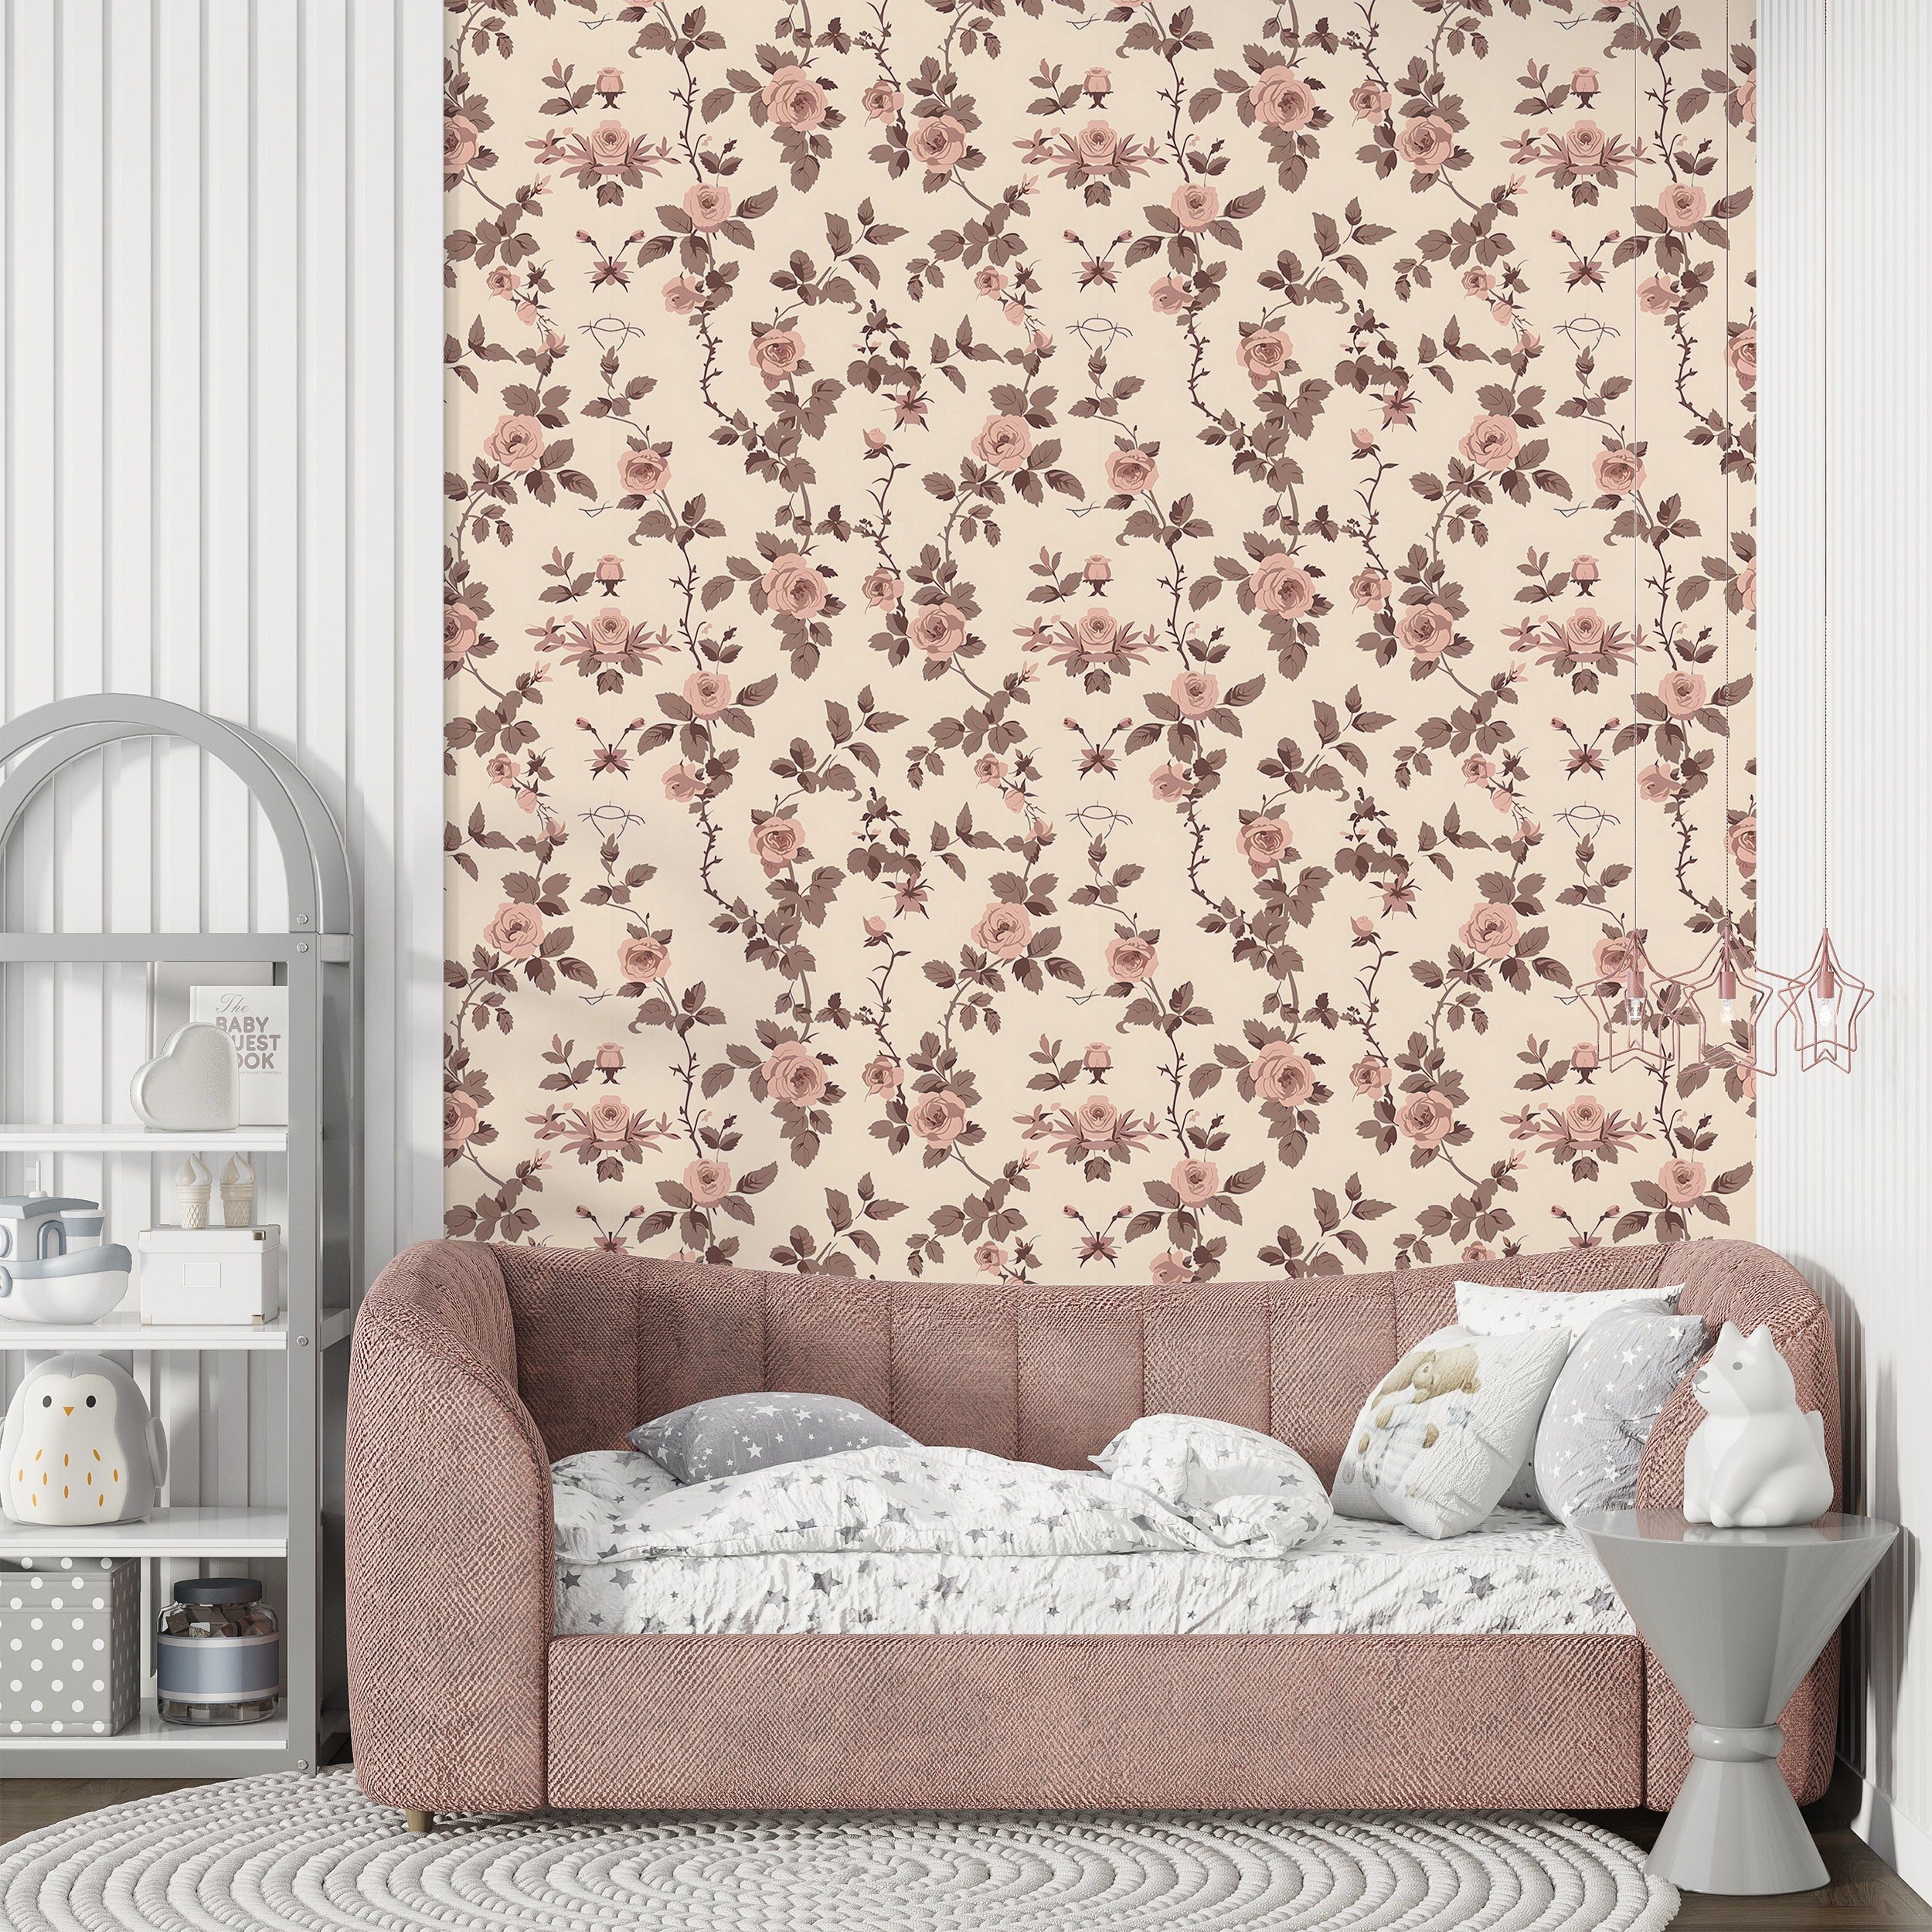 Watercolor floral wallpaper perfect for any room